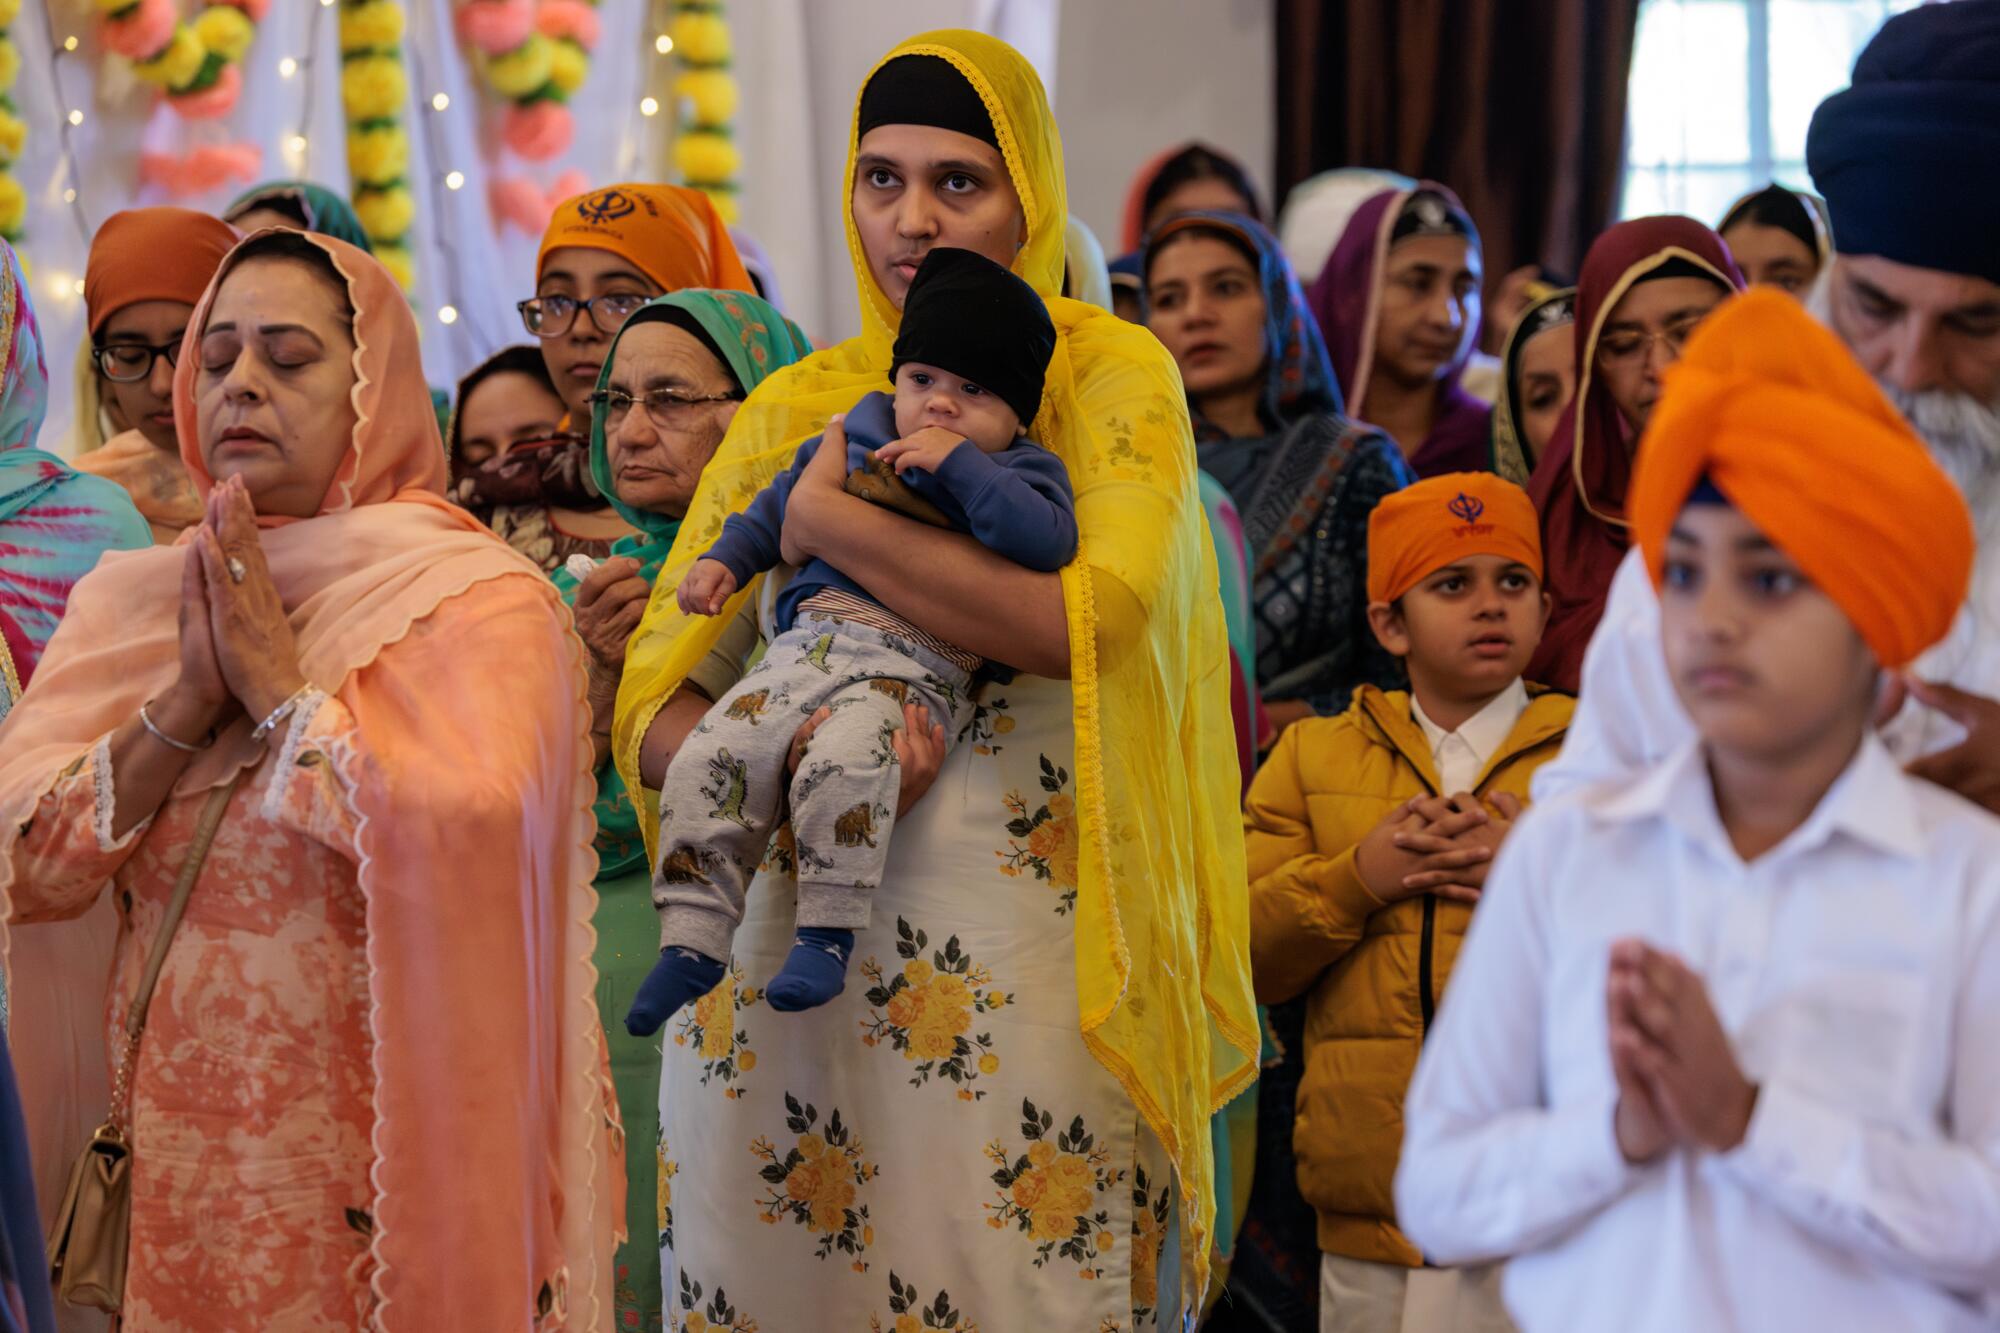 A woman in a yellow head covering, holding a young child, is flanked by another woman and orange-turbaned children